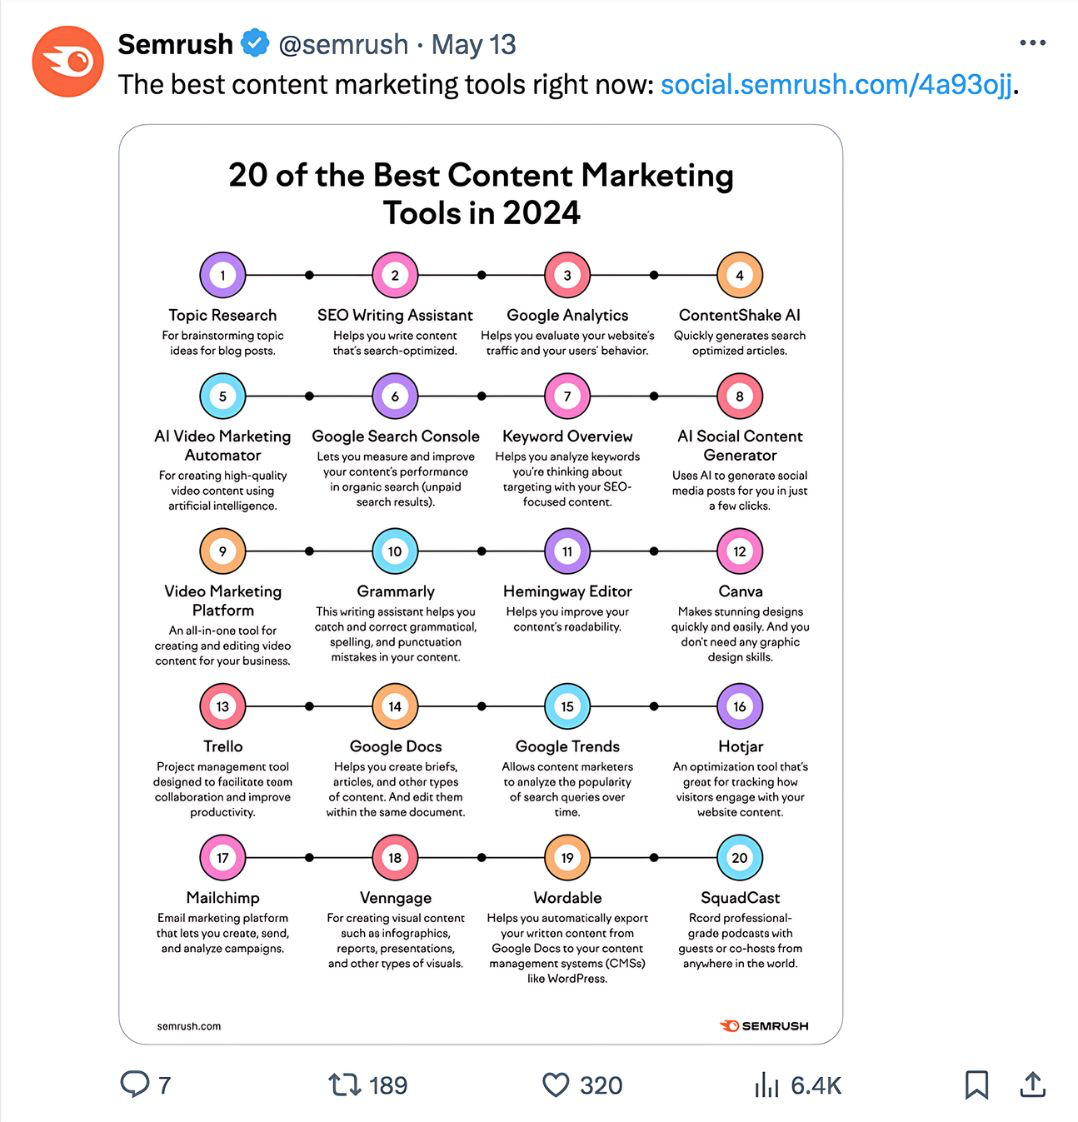 A Semrush Twitter post showing an overview of the 20 best content marketing tools in 2024